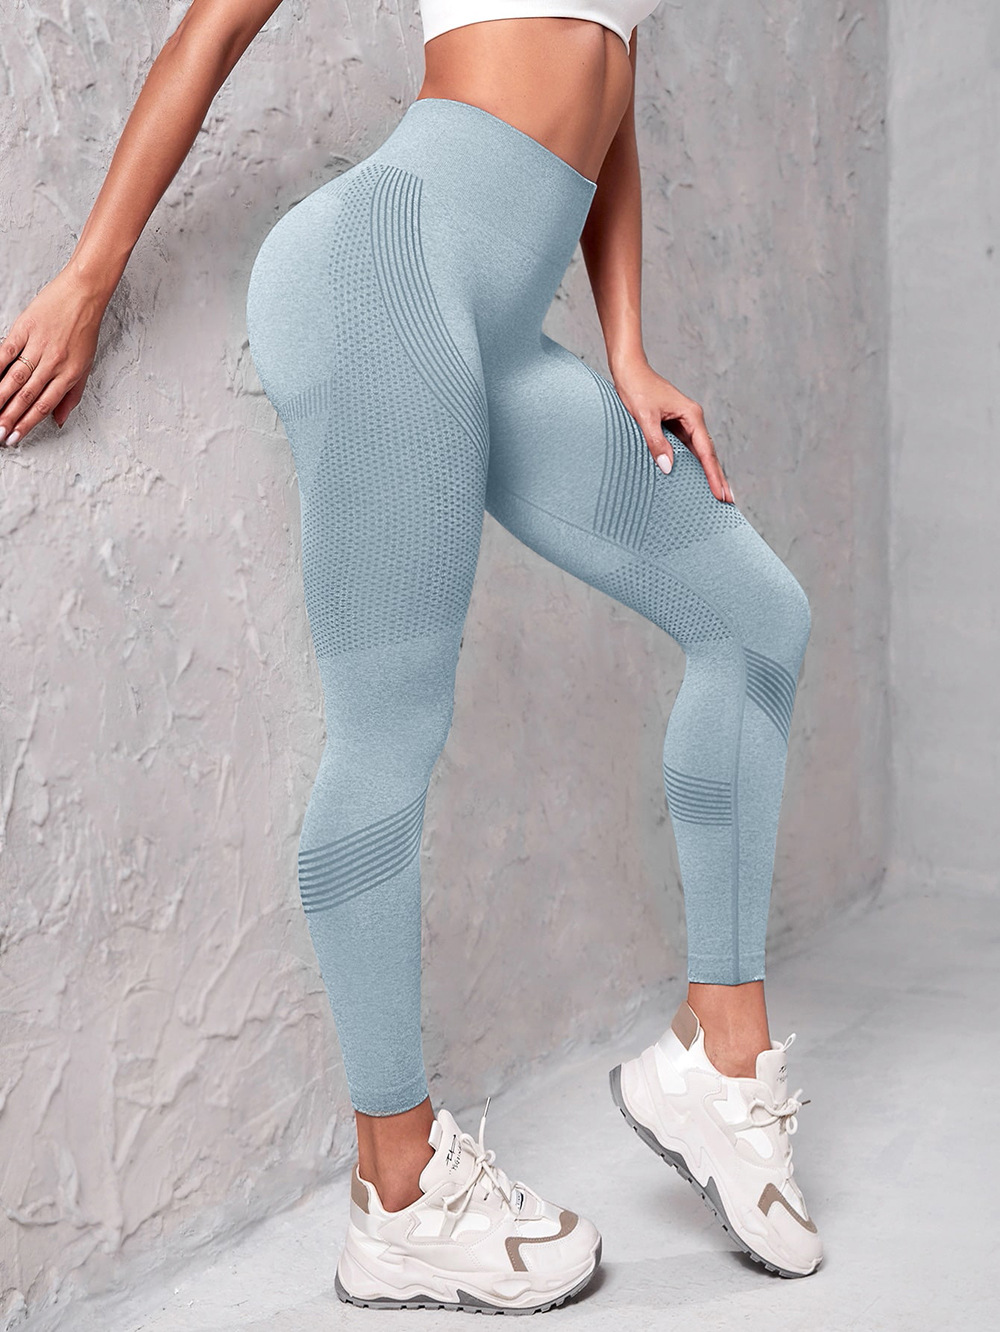 Trendy Stripe Pattern High Waisted Leggings Printed Workout Pants Spandex  Yoga Fitness Leggings Gym Clothing Sport Tights Bottoms 